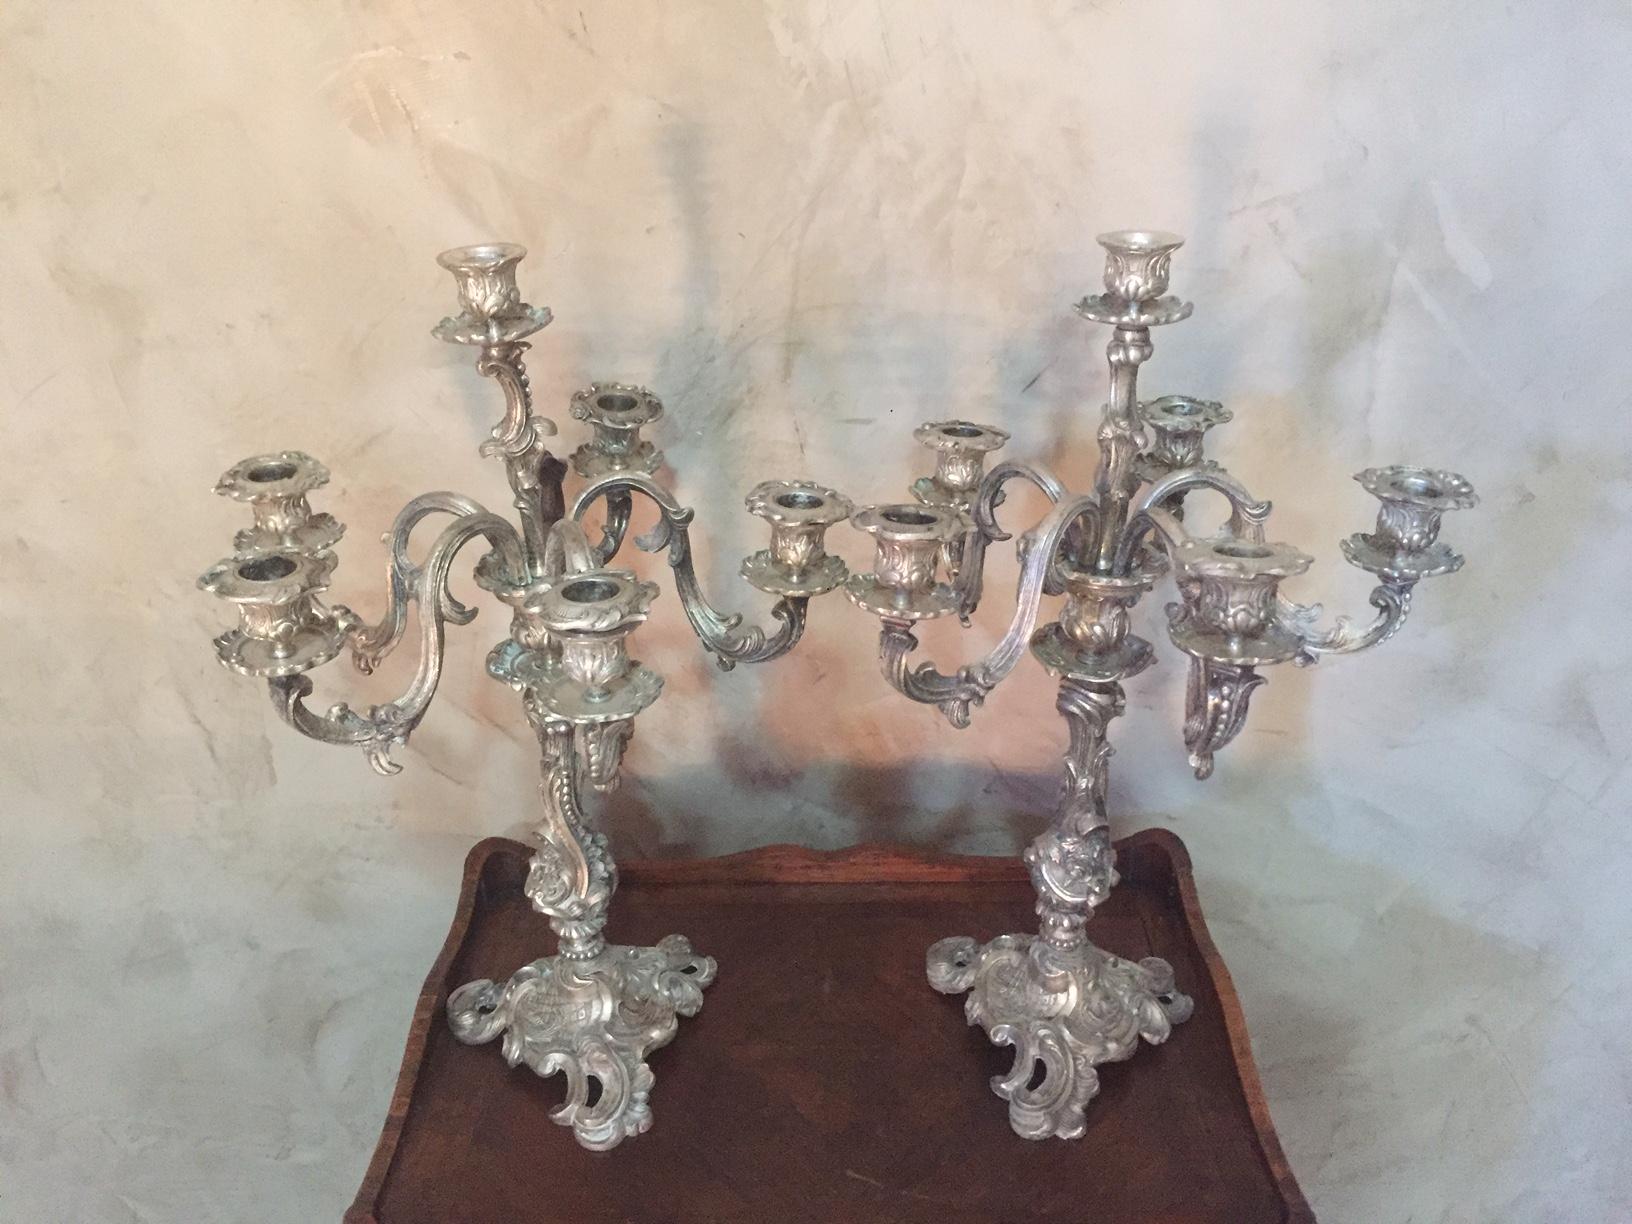 Very nice early 20th century Louis XV pair of silvered bronze candleholder from the 1900s.
Six lights. Sculpted details of flowers. Very good quality.